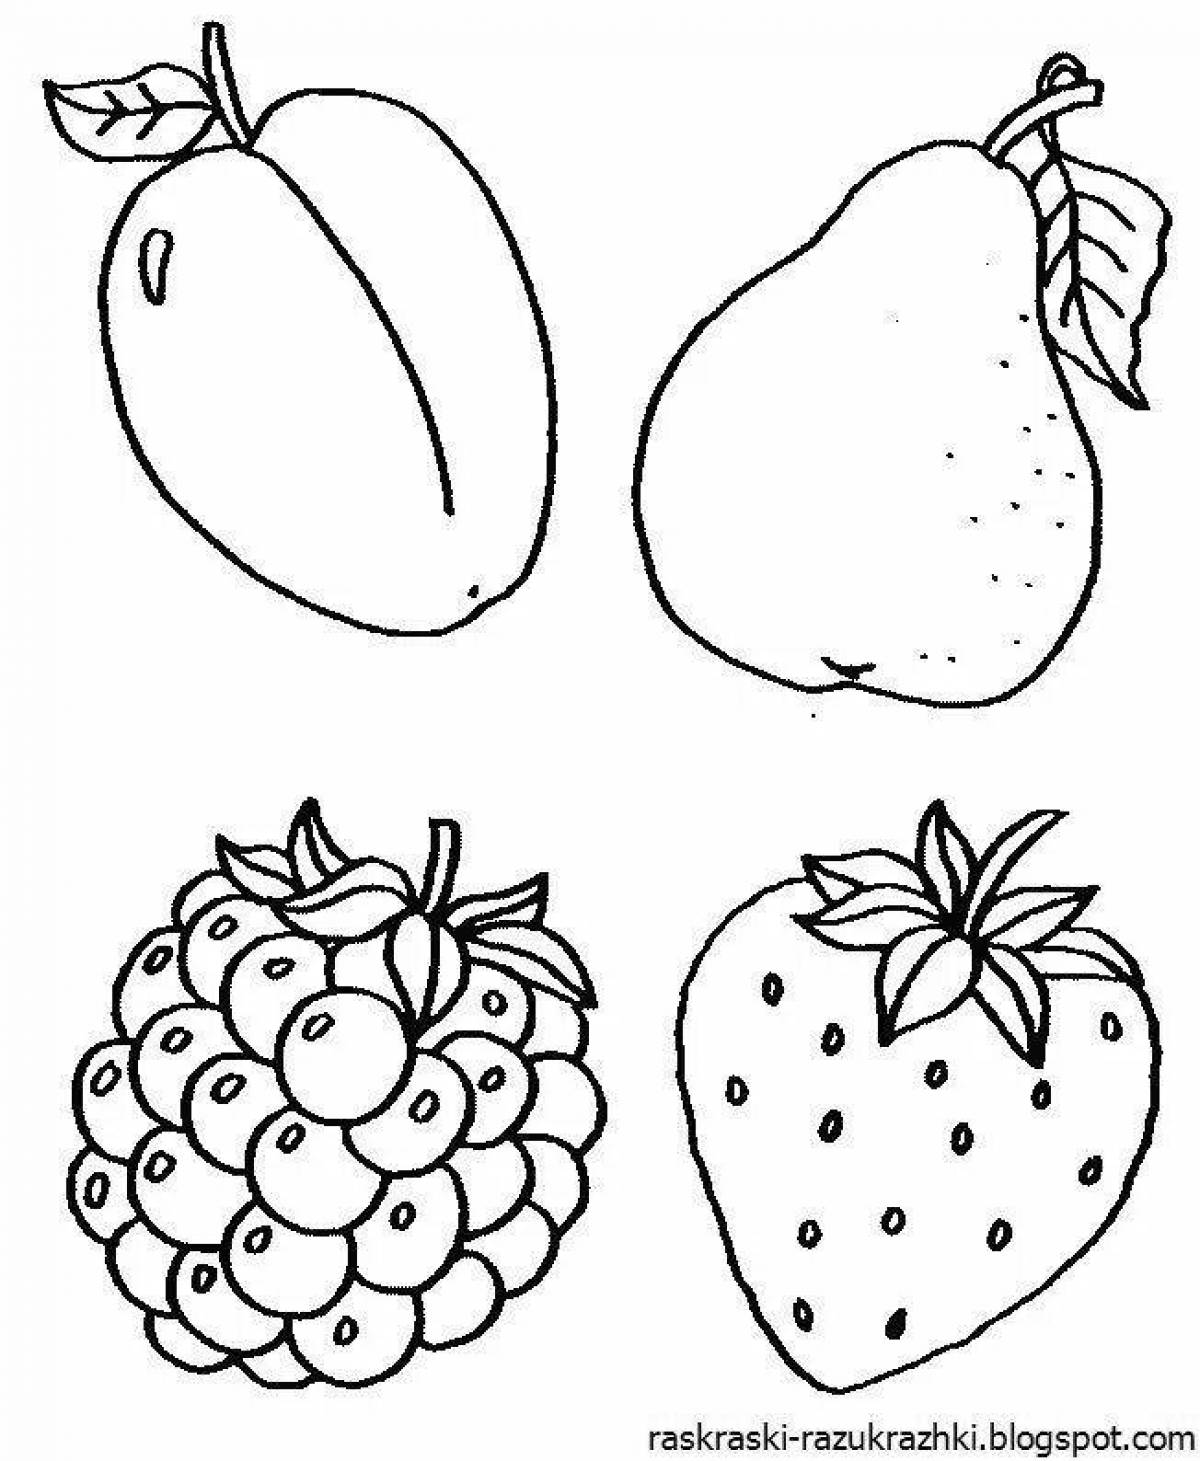 Creative vegetable coloring book for kids